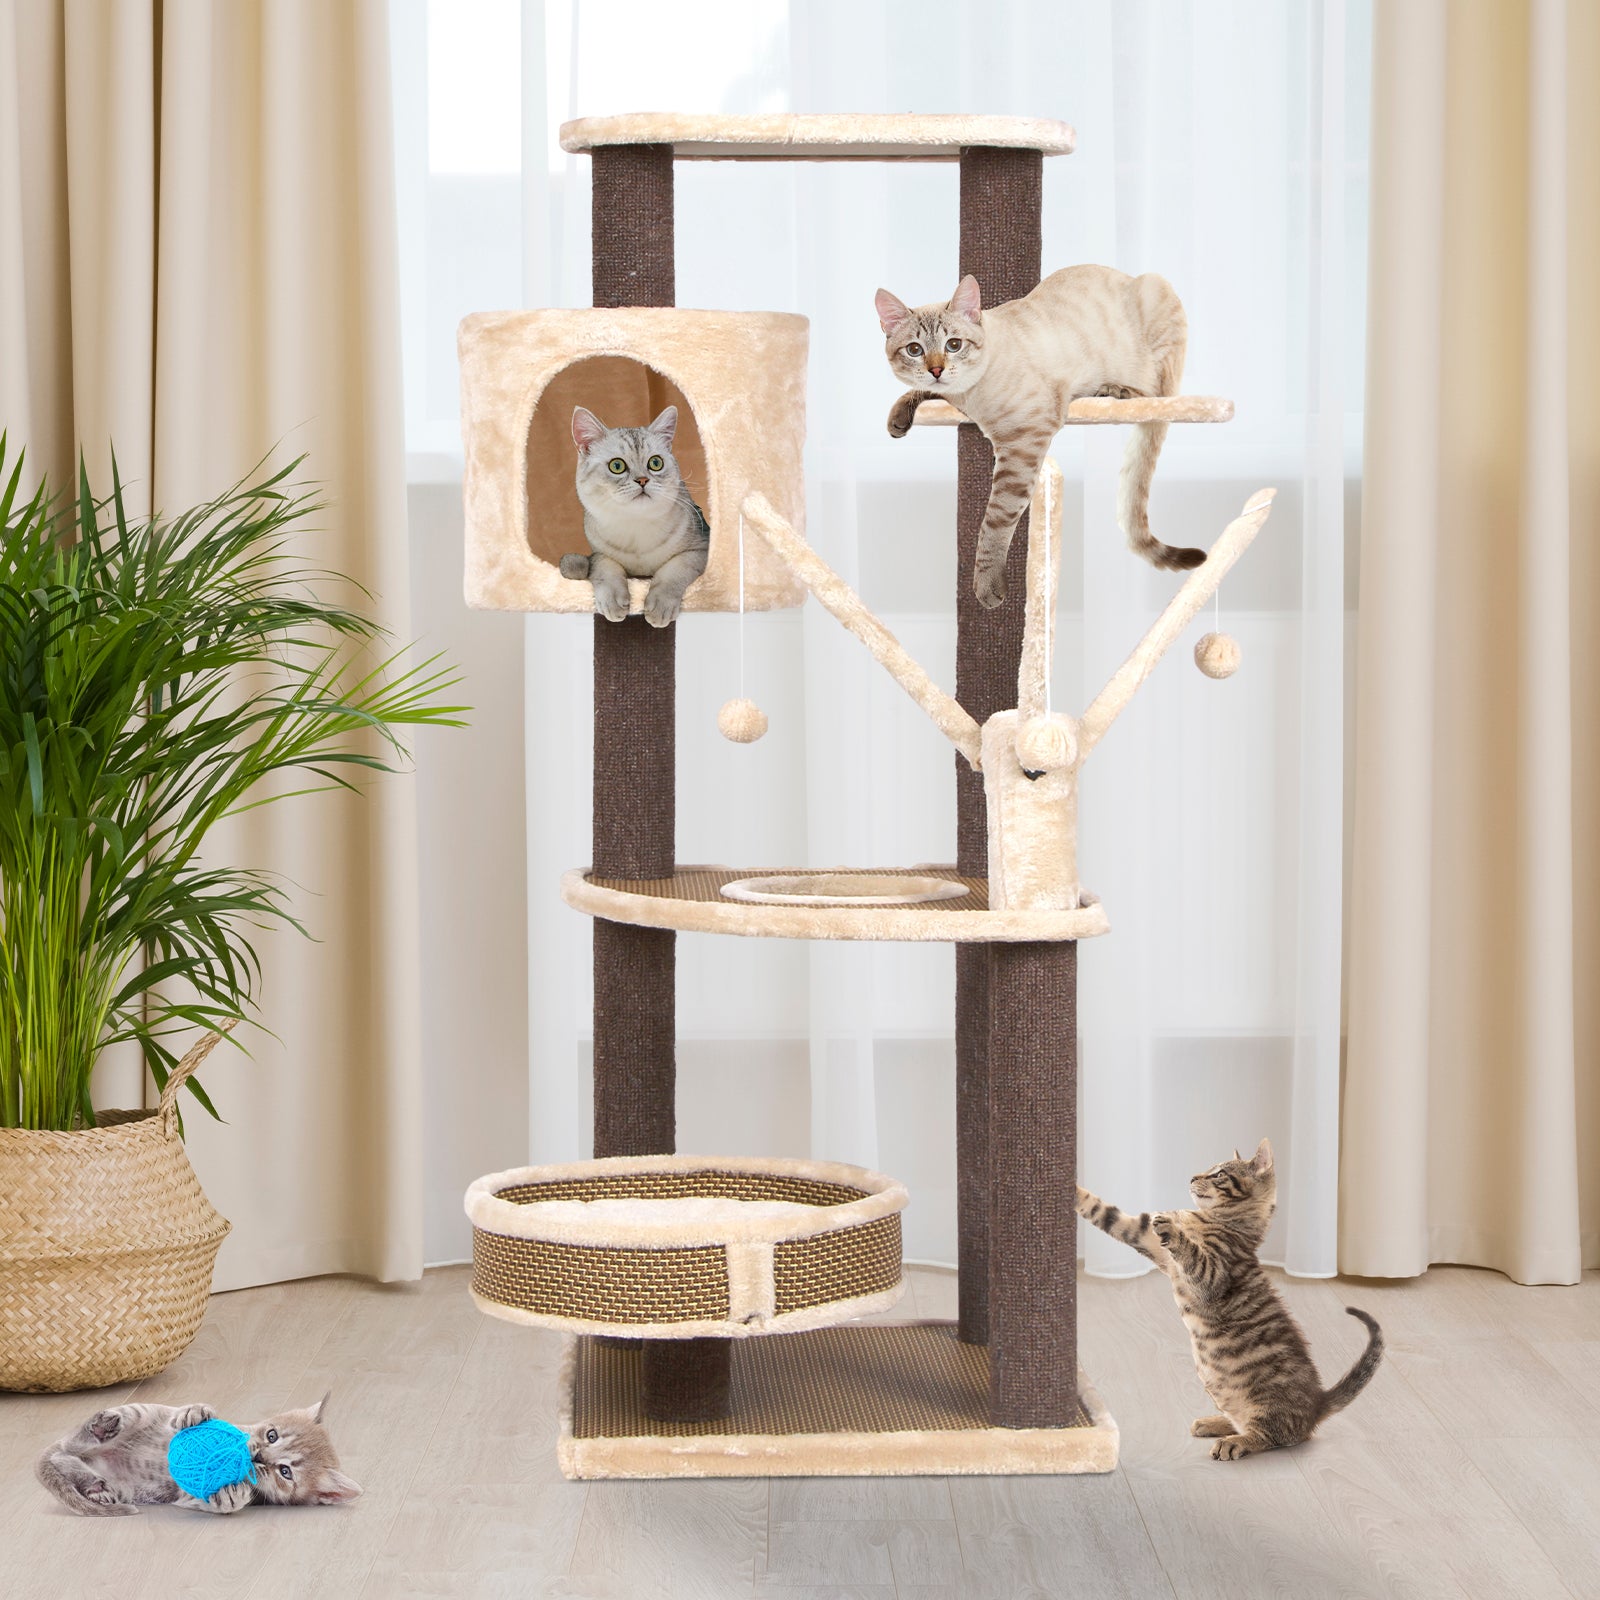 Advwin 110CM Cat Tree Multi-Level Trees Scratching Post Scratcher Tower Condo House